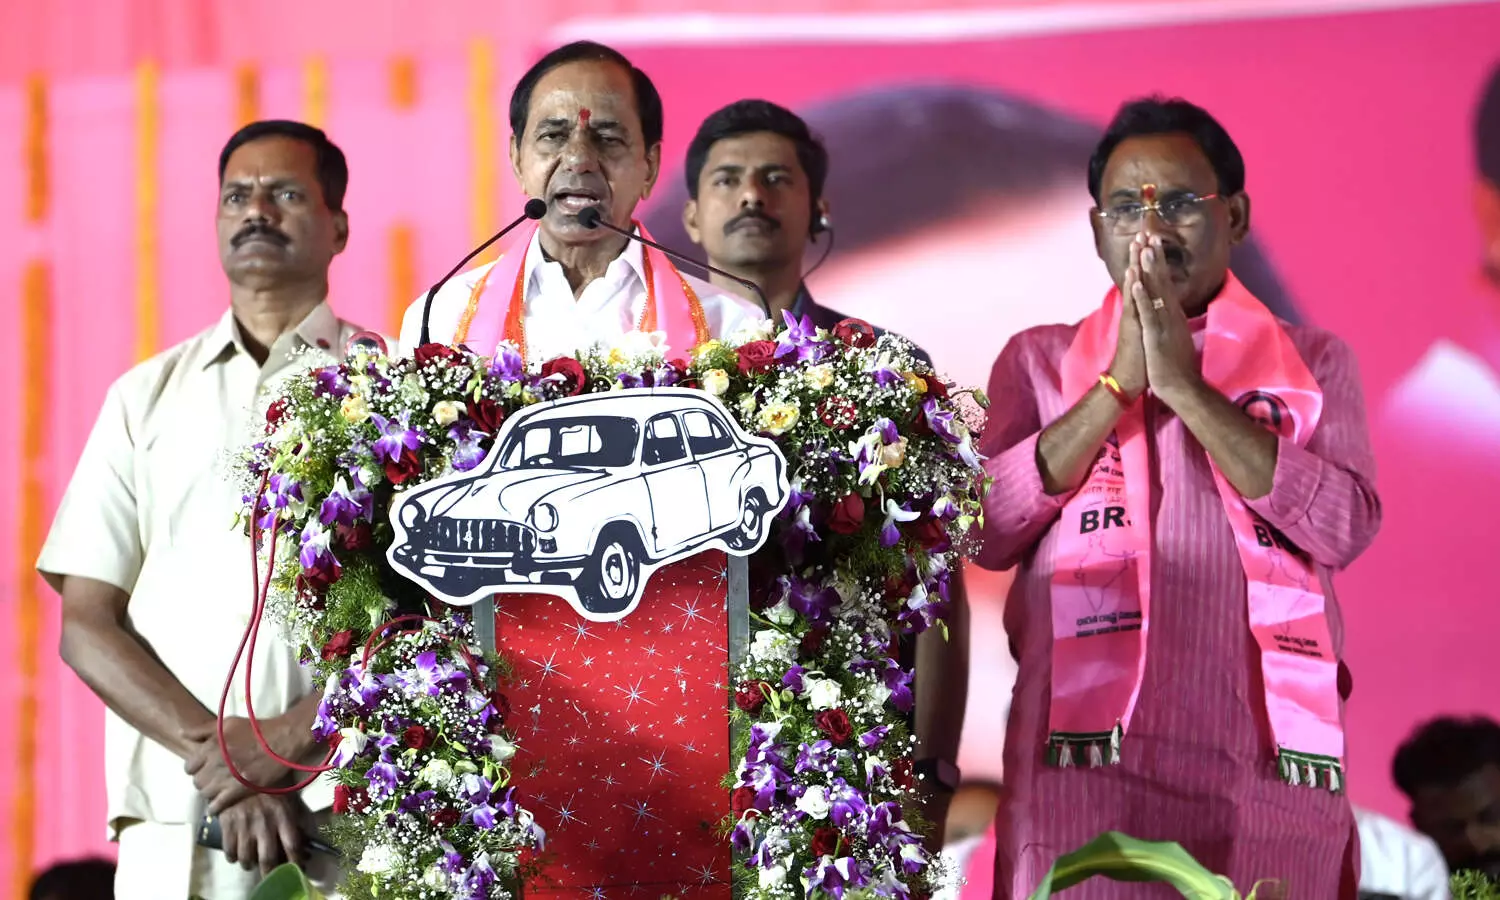 BRS delivered most promises made to Munugode voters in bypoll, says KCR